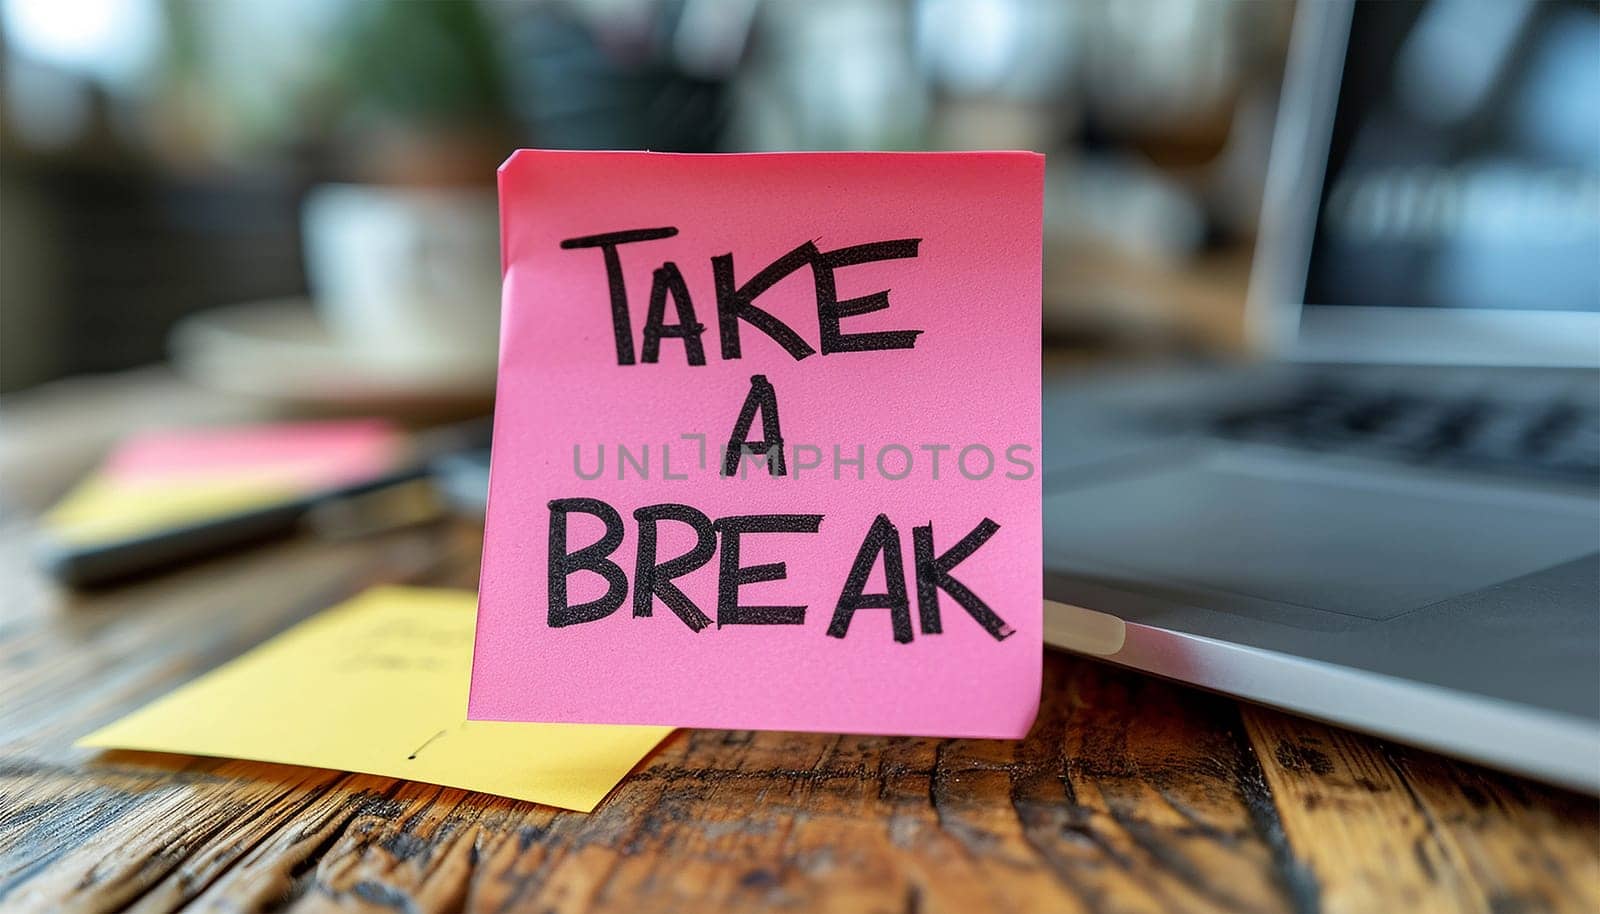 Work place,office room desk with sticky note text "Take a break" concept for relaxing,enjoy life. by Annebel146